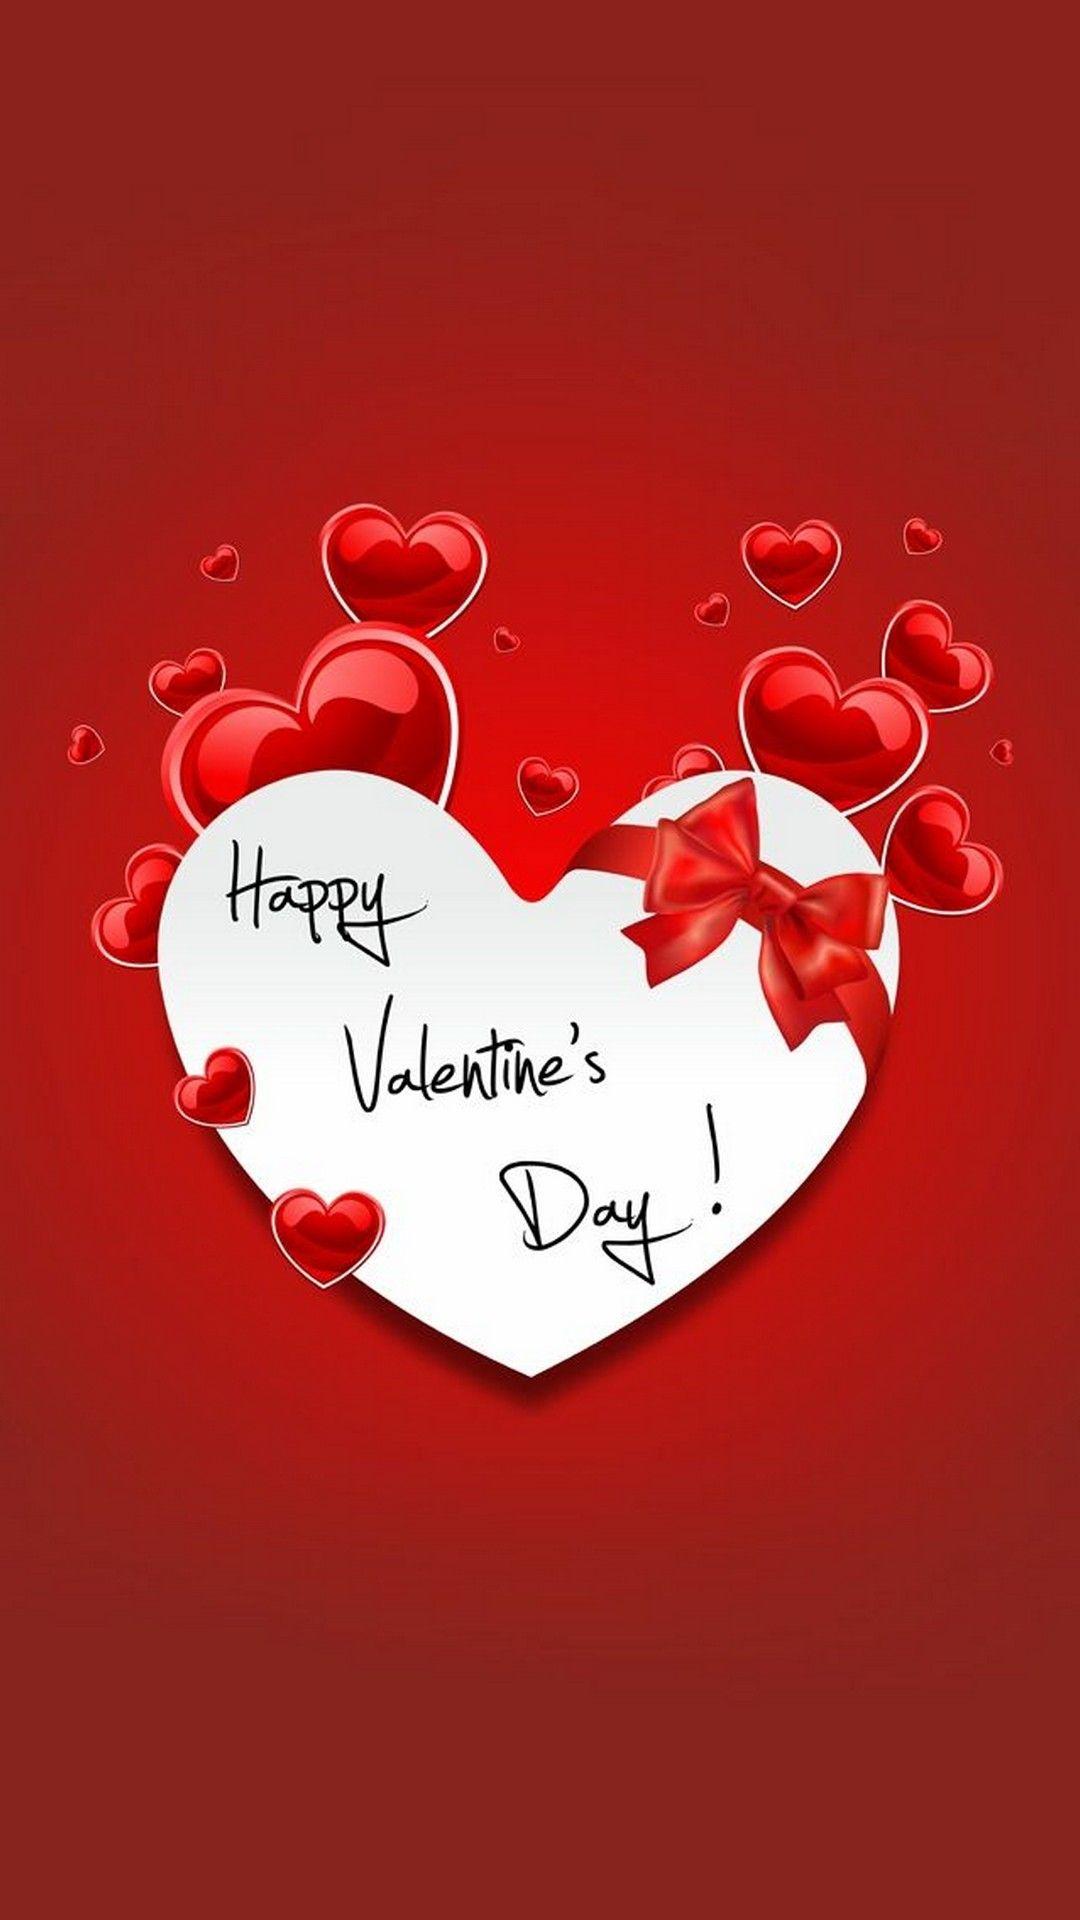 Wallpaper Happy Valentines Day Image Android Android